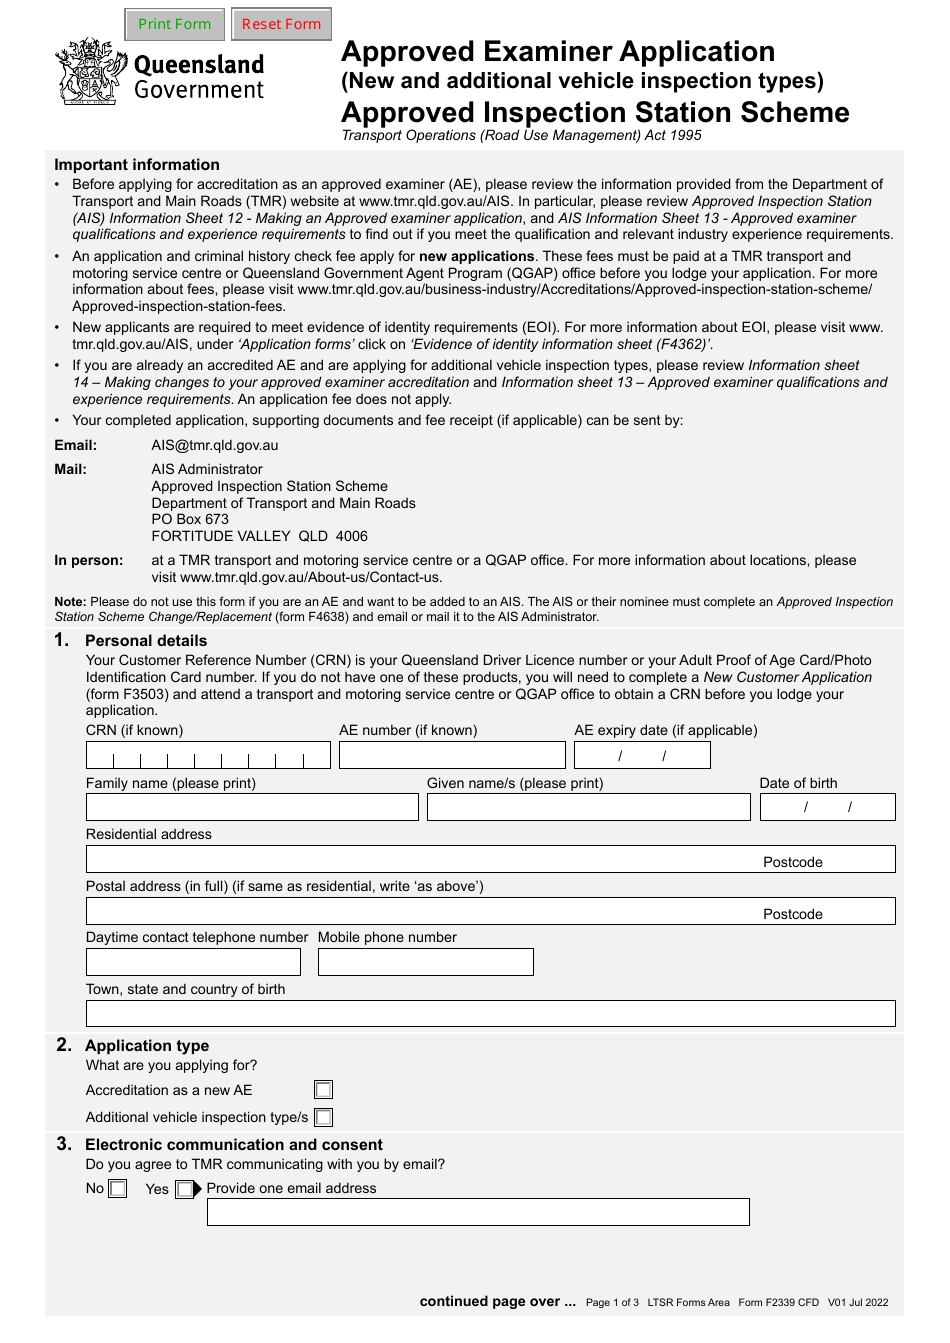 Form F2339 Approved Examiner Application (New and Additional Vehicle Inspection Types) - Approved Inspection Station Scheme - Queensland, Australia, Page 1